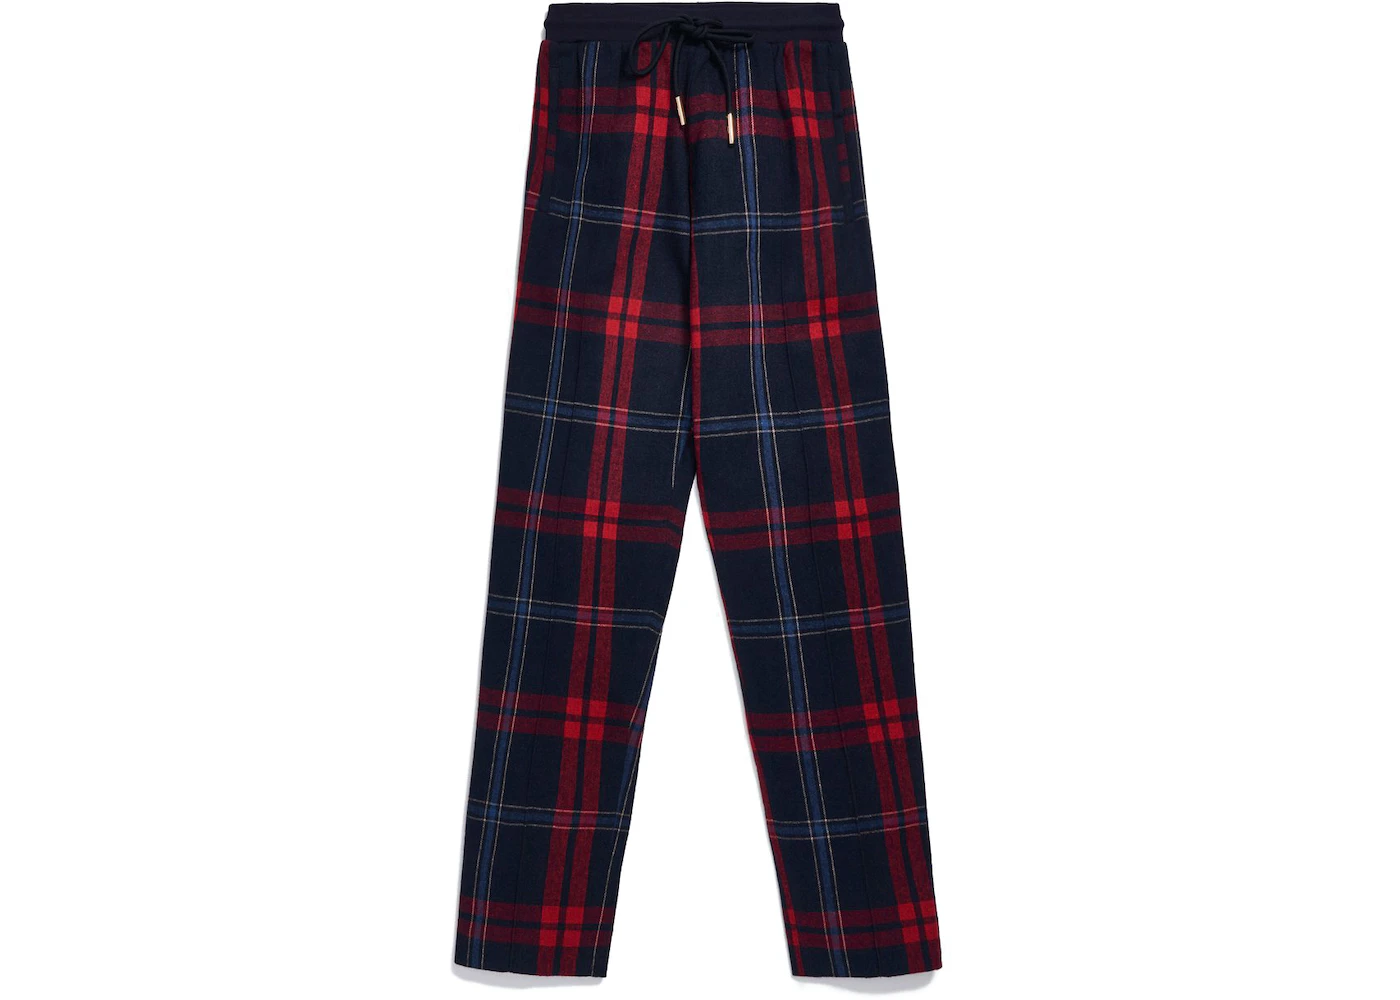 Kith for Bergdorf Goodman Lewis Track Pant Navy/Blue Plaid Men's - FW20 ...